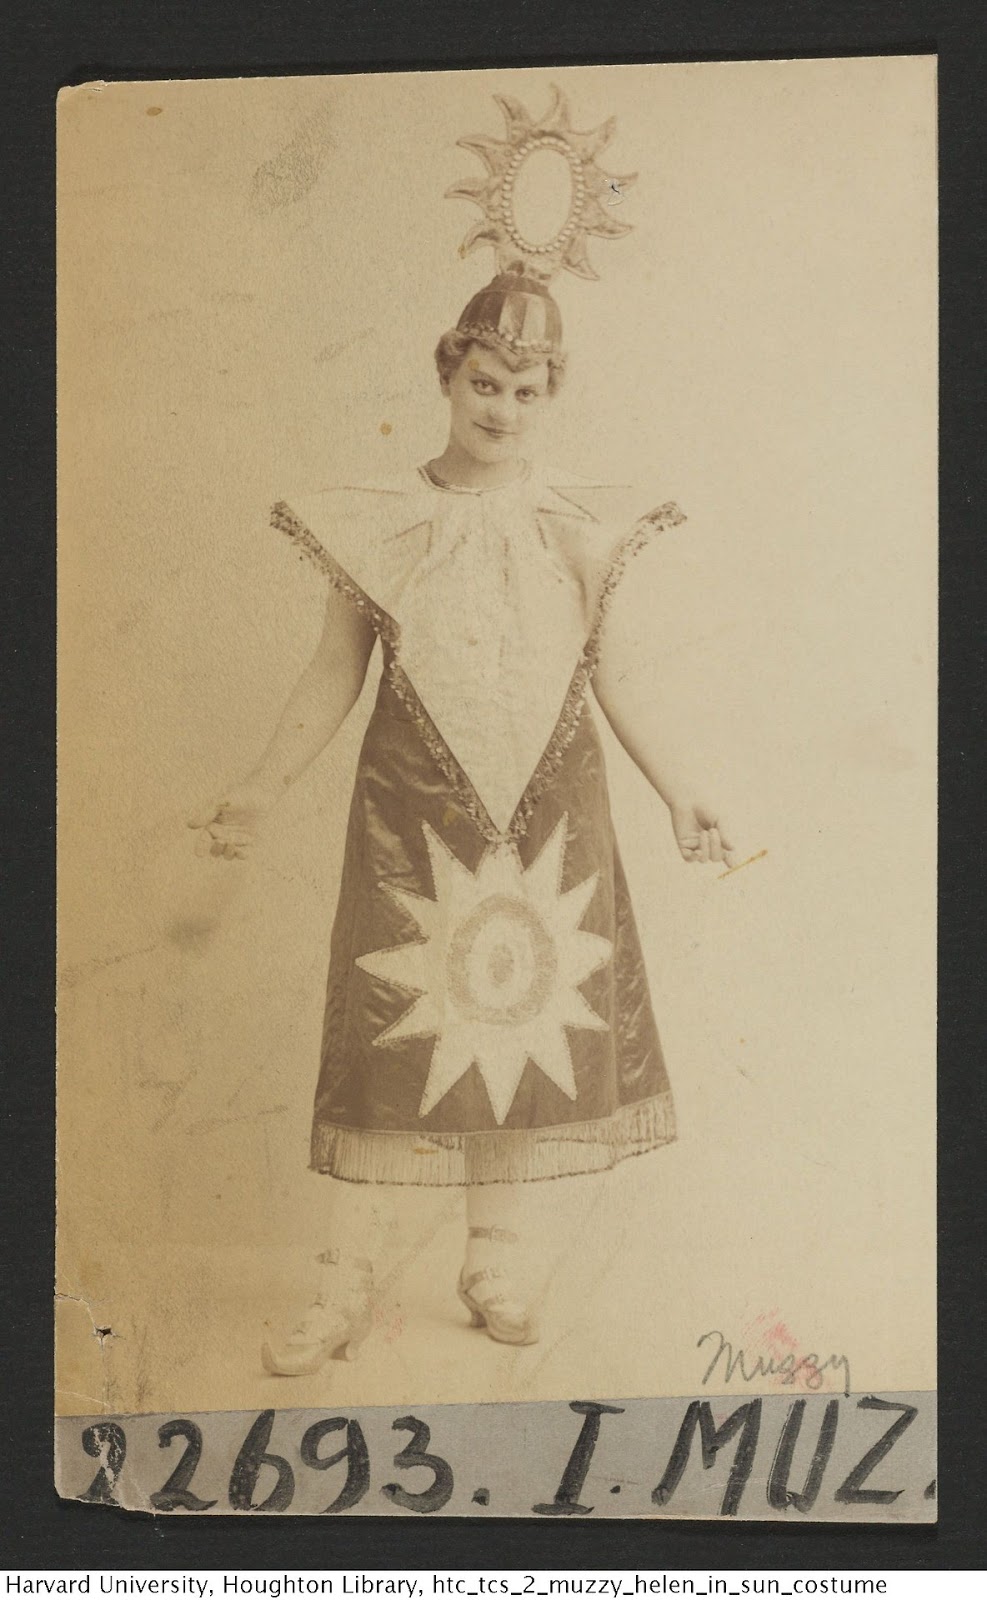 Historical photo of actress Helen Muzzy in wizardly "sun" costume